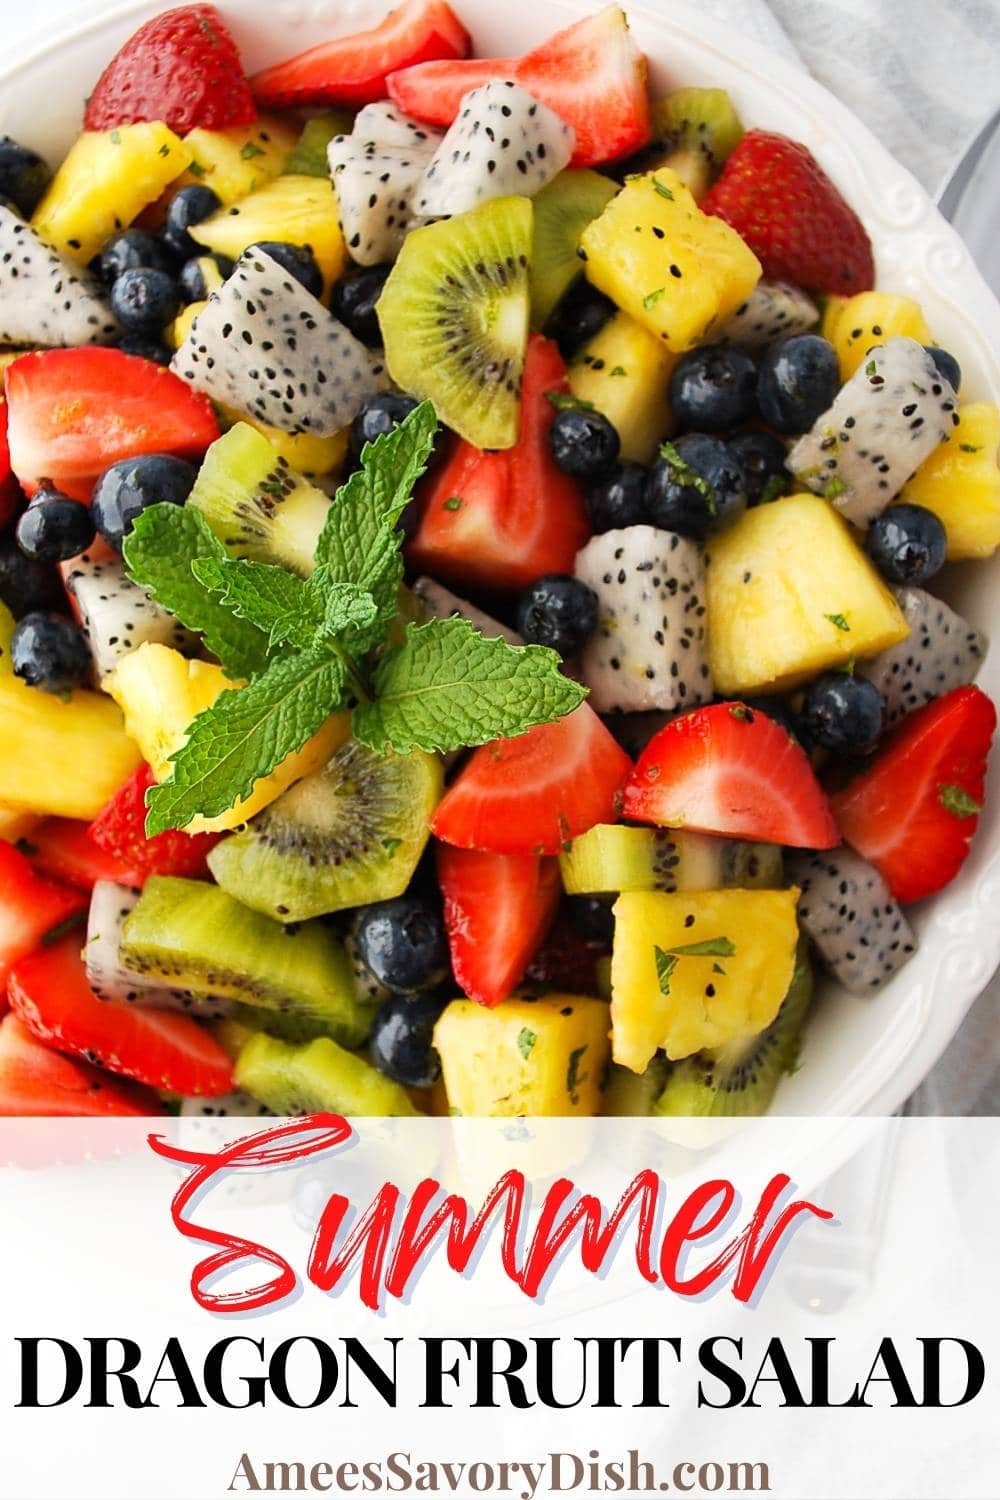 This Dragon Fruit Salad is amazing! Soft and sweet dragon fruit, pineapple, kiwi, and berries are tossed in a simple honey lime dressing. via @Ameessavorydish